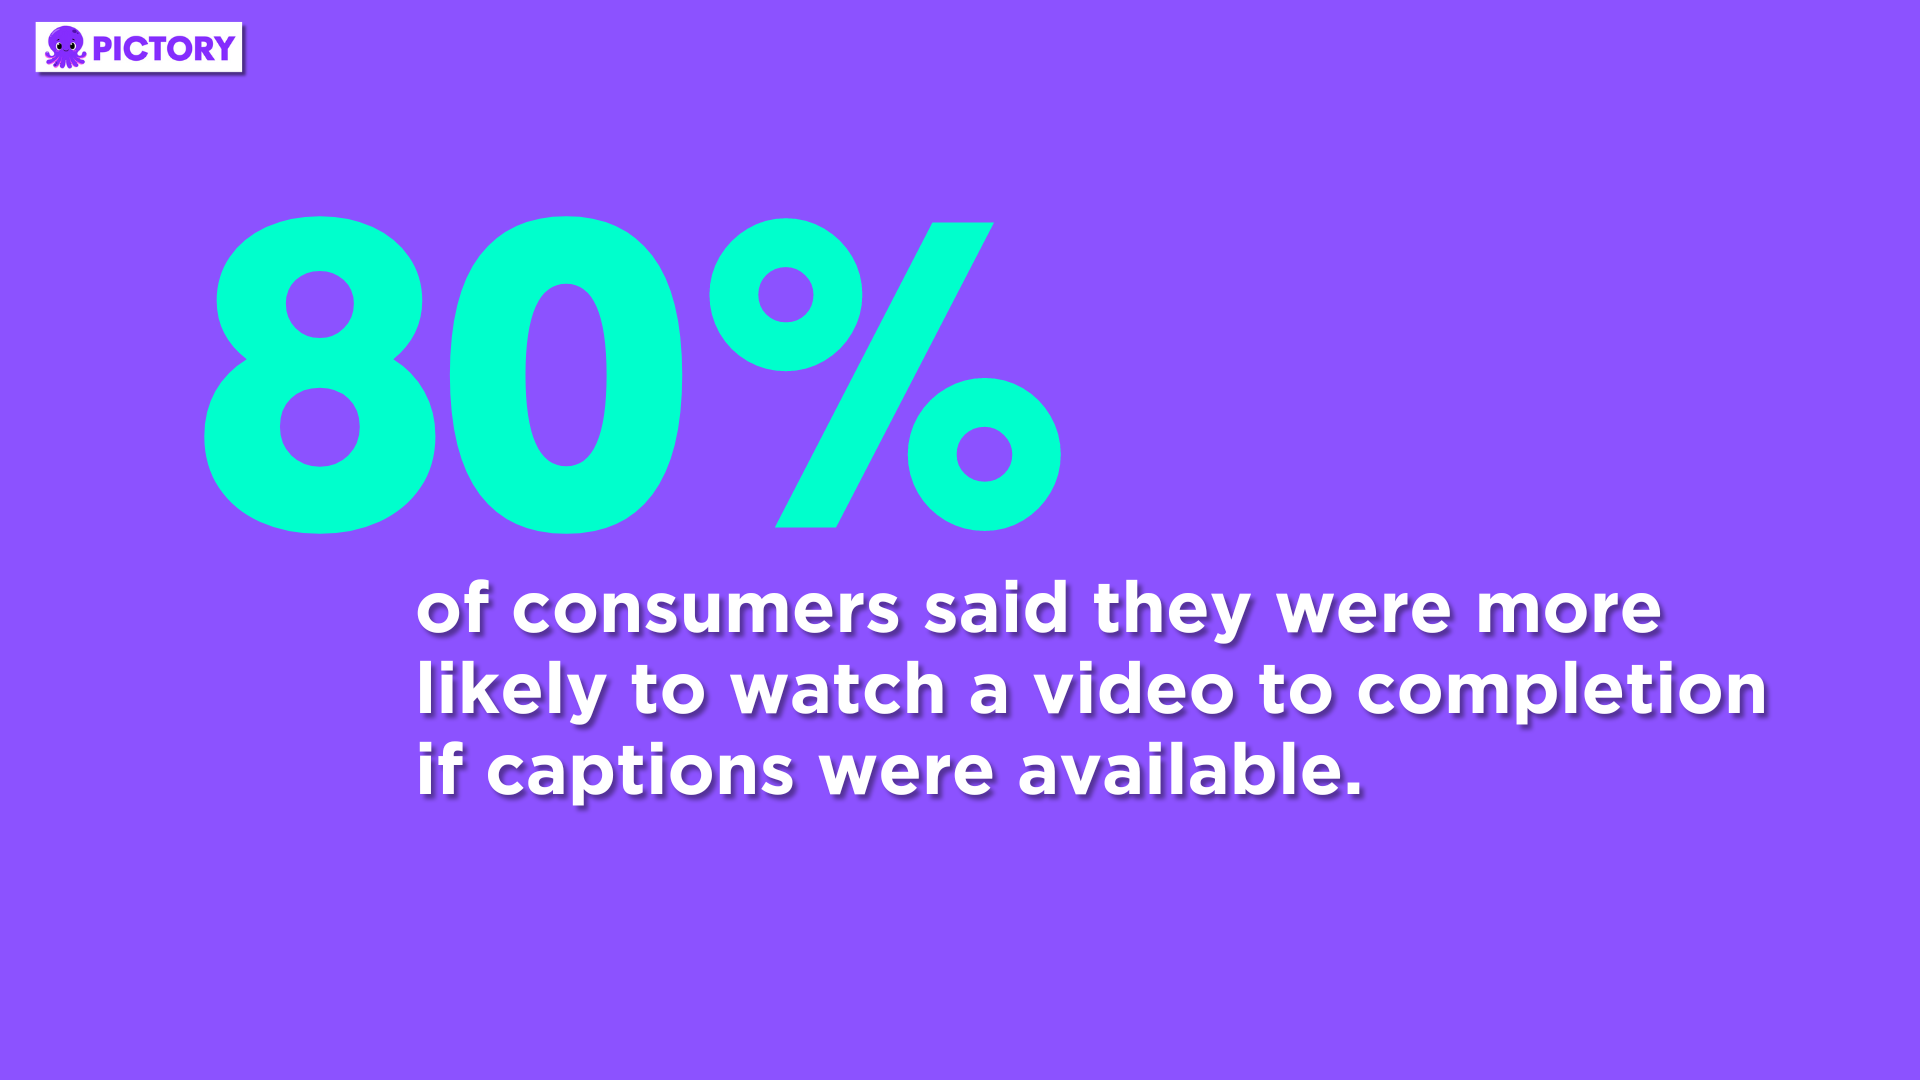 Video consumer statistic, inforgraohic, 80% of consumers said they were more likely to watch a video to completion if captions were available.